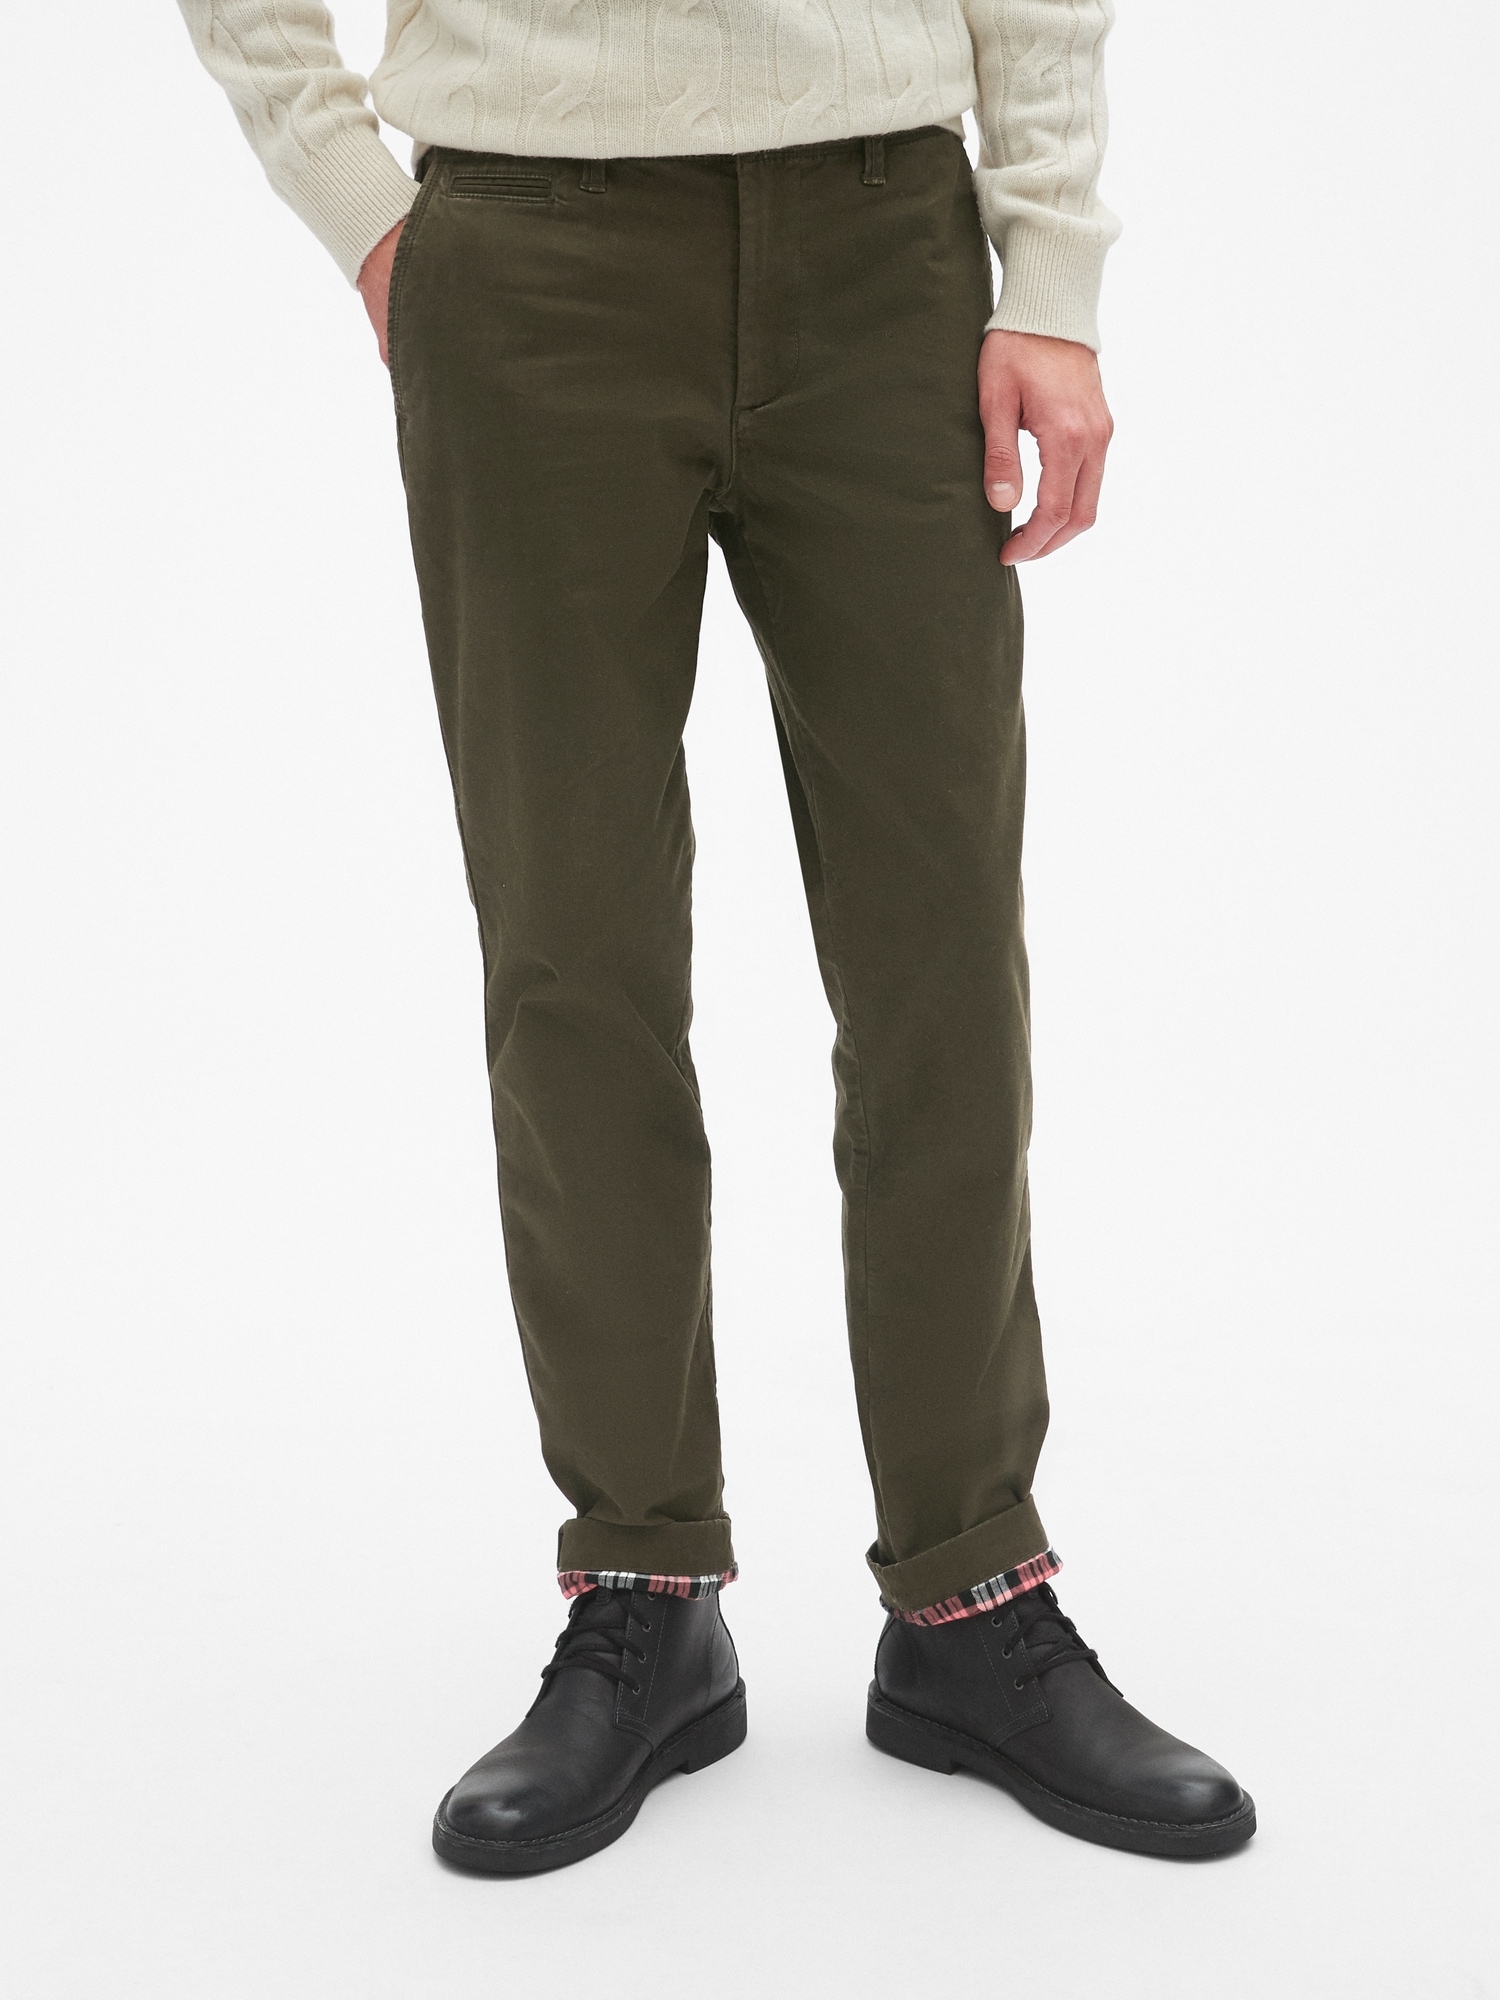 Flannel-Lined Khakis in Slim Fit with GapFlex